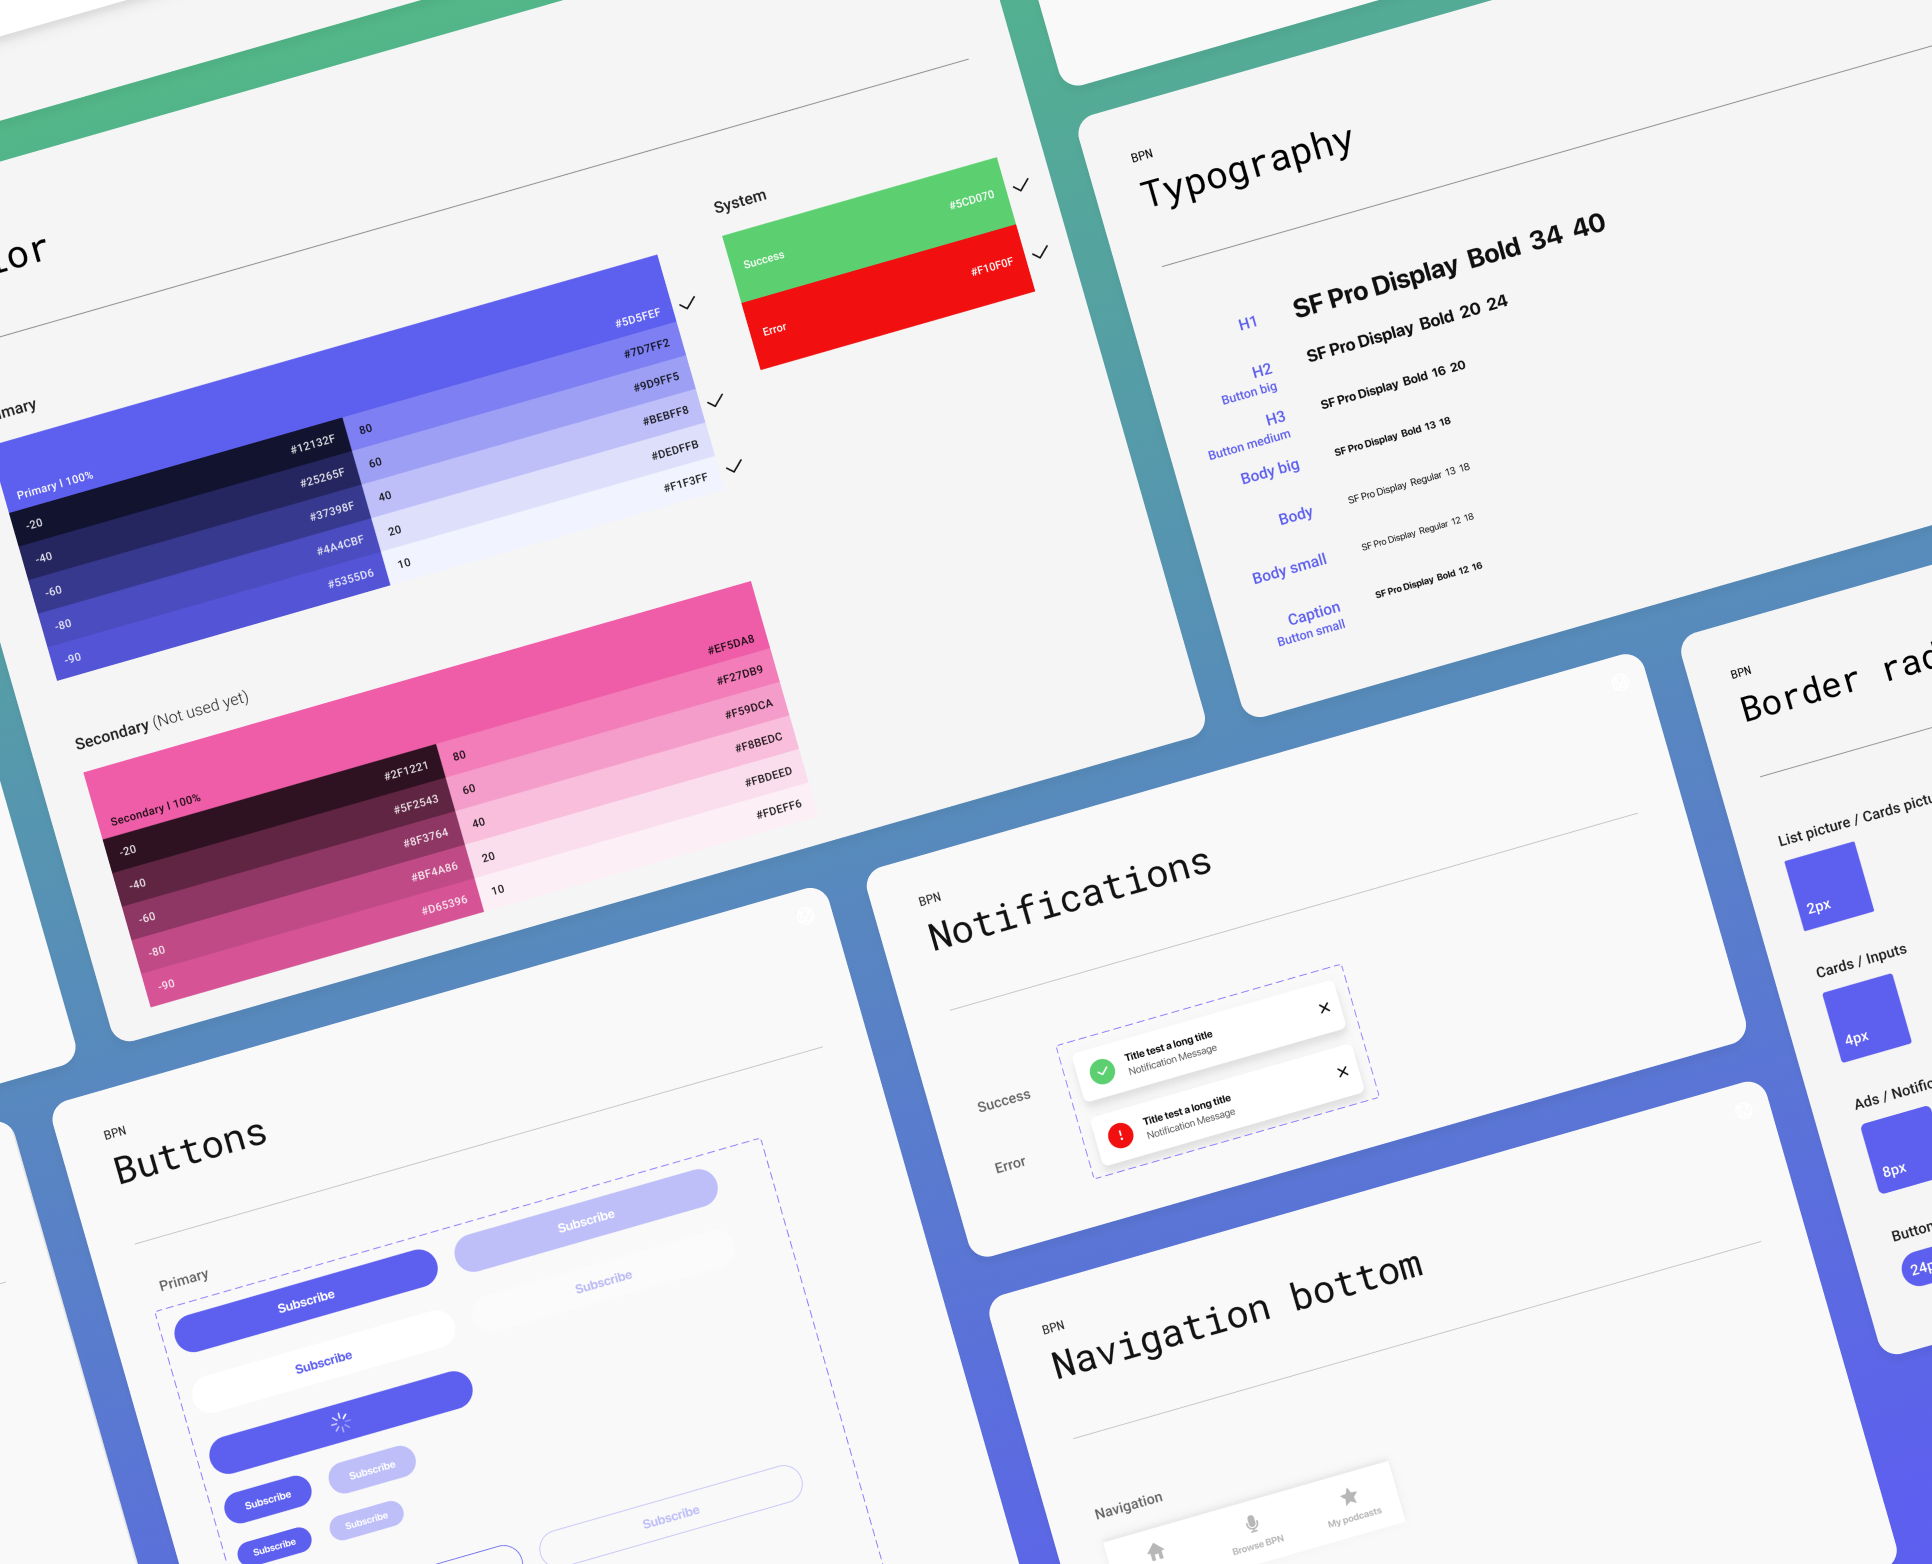 Overview of the design system